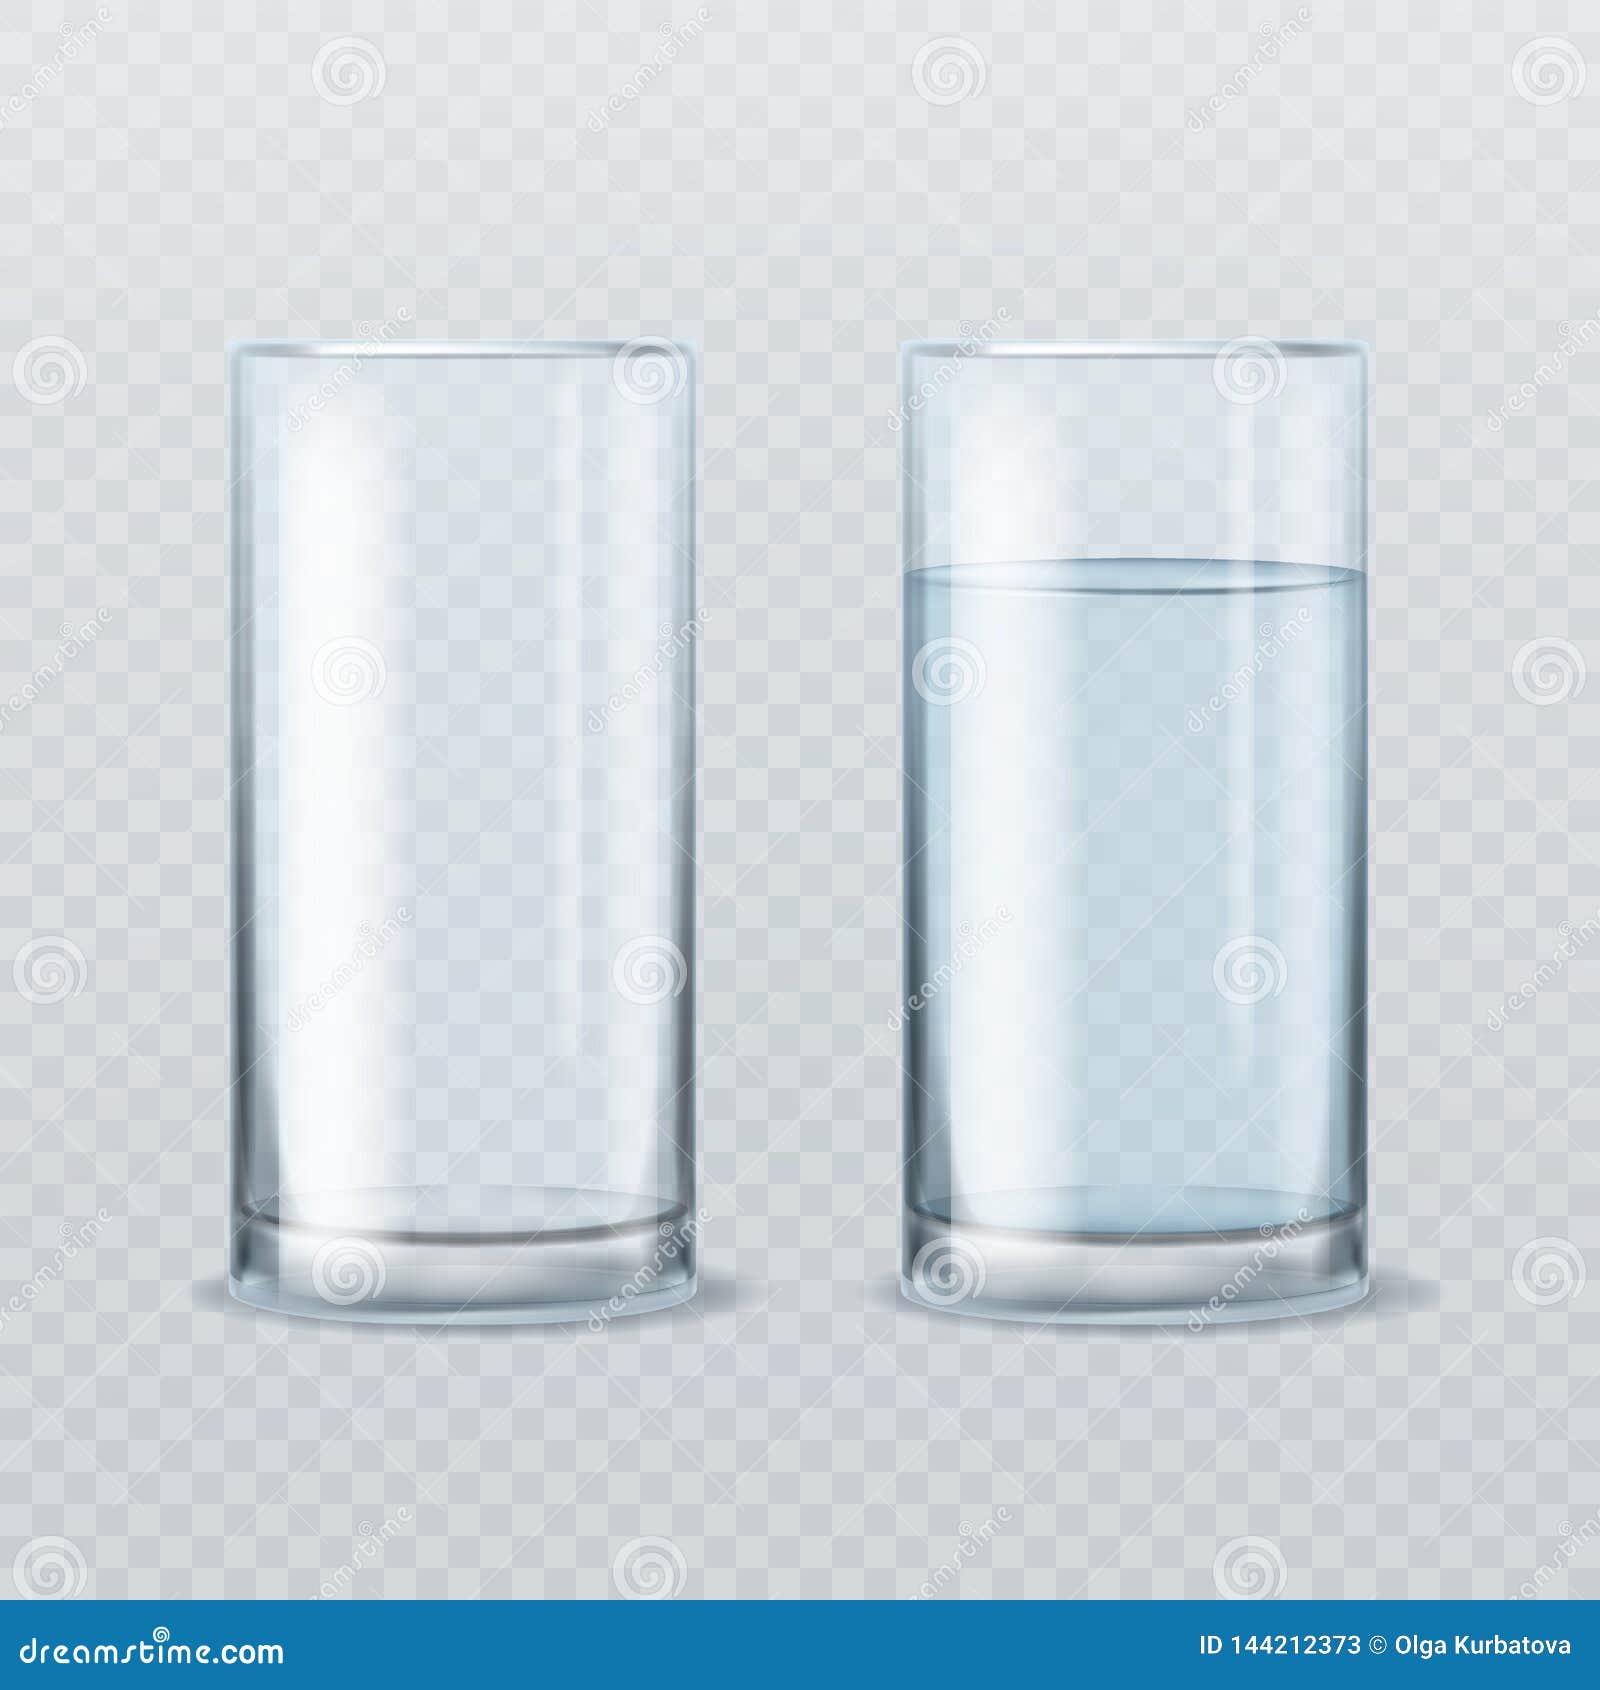 https://thumbs.dreamstime.com/z/realistic-water-glass-empty-full-clean-mineral-healthy-glasses-beverage-drink-product-isolated-vector-purity-mockup-144212373.jpg